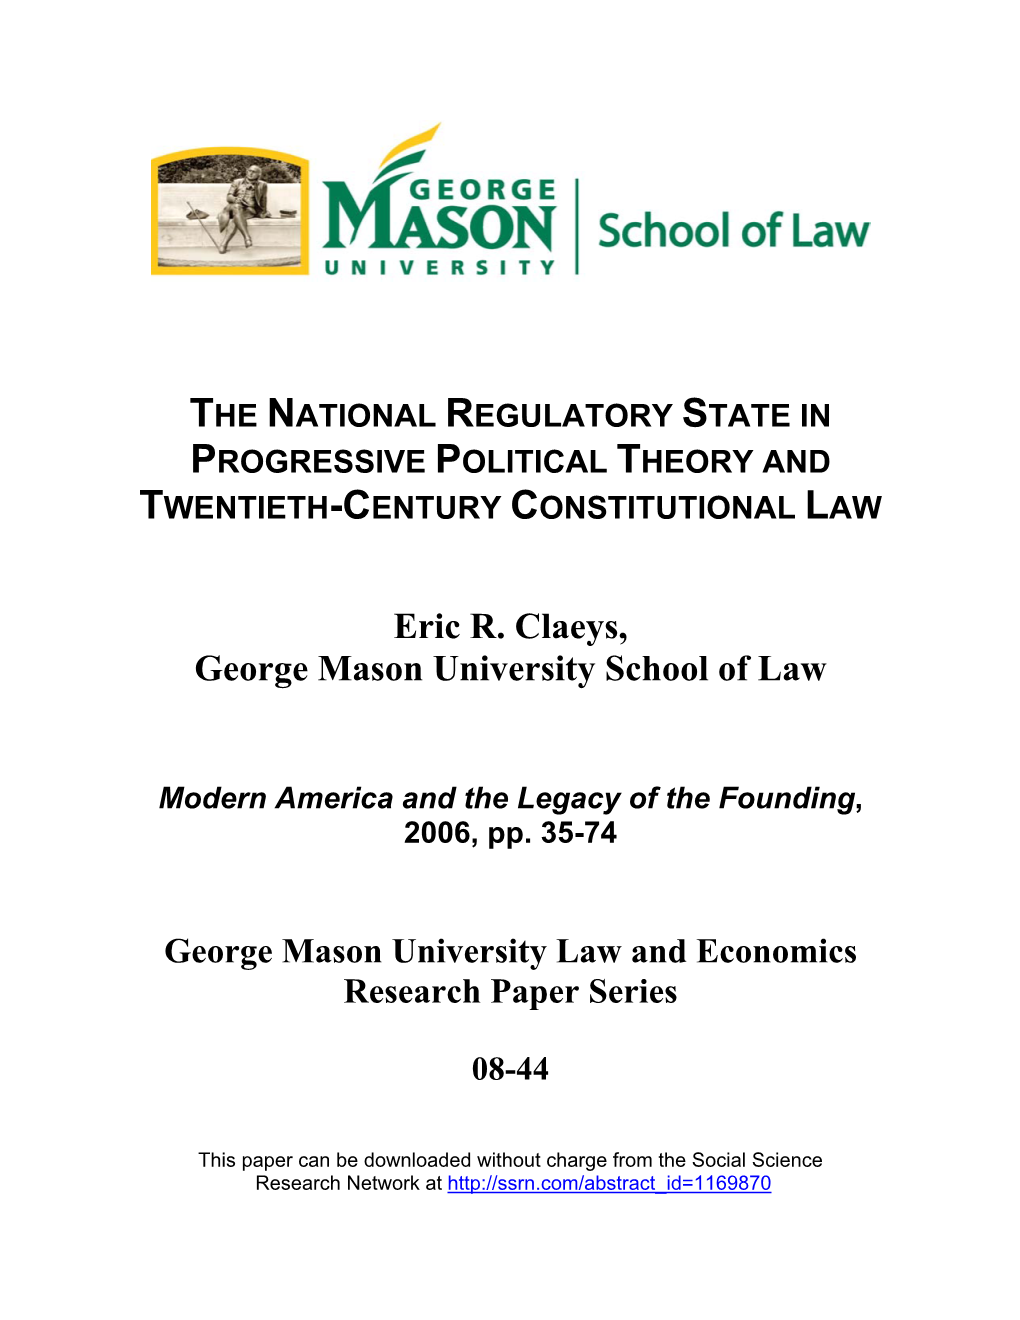 The National Regulatory State in Progressive Political Theory and Twentieth-Century Constitutional Law